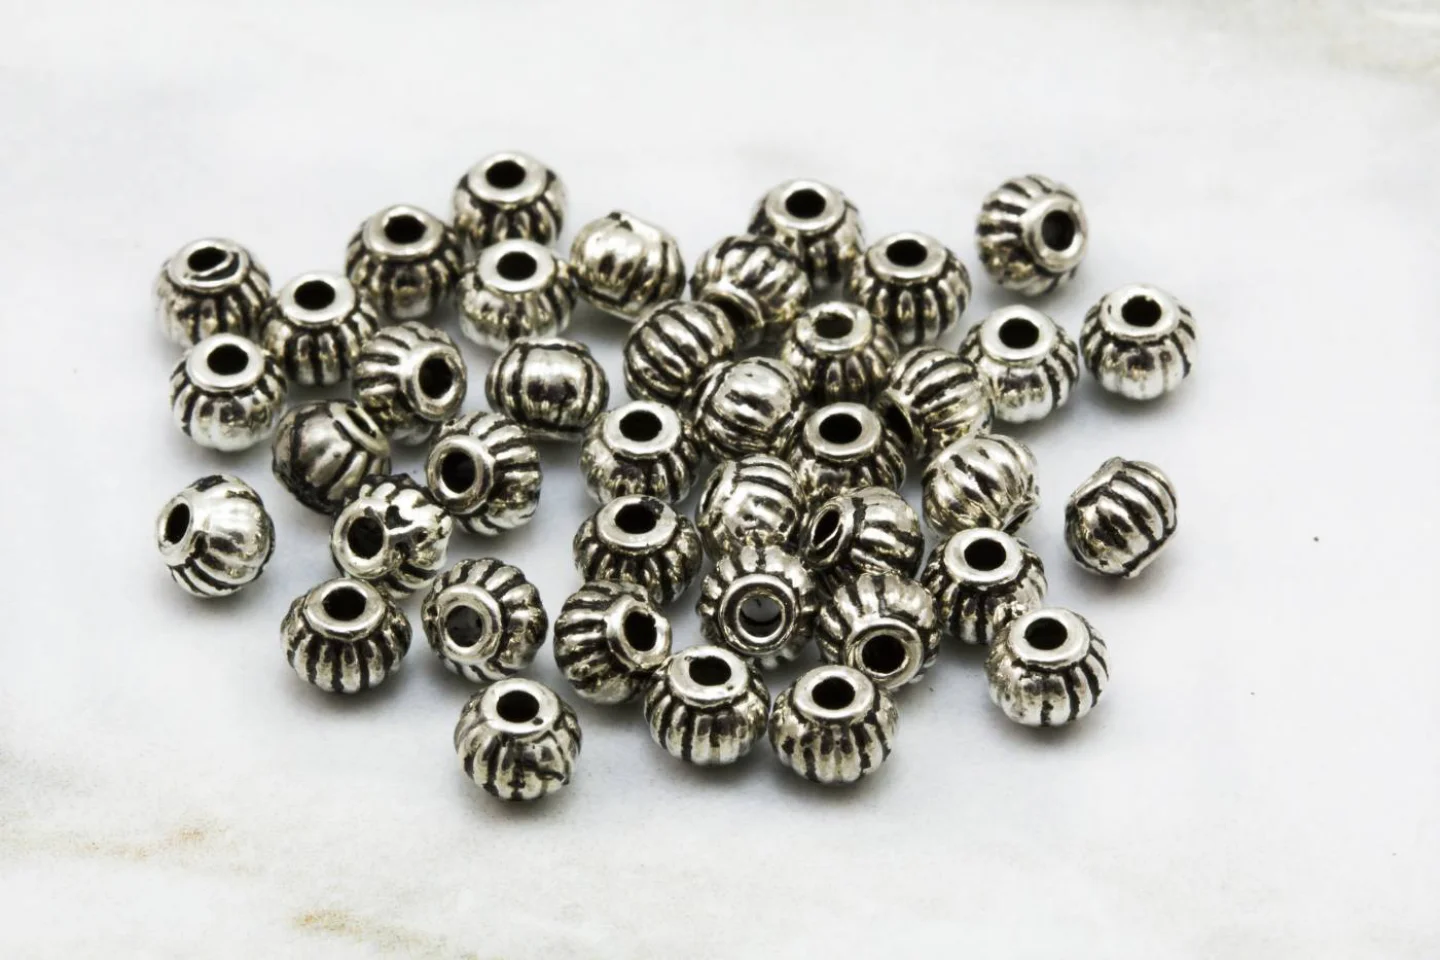 small-round-ball-jewelry-spacer-beads.